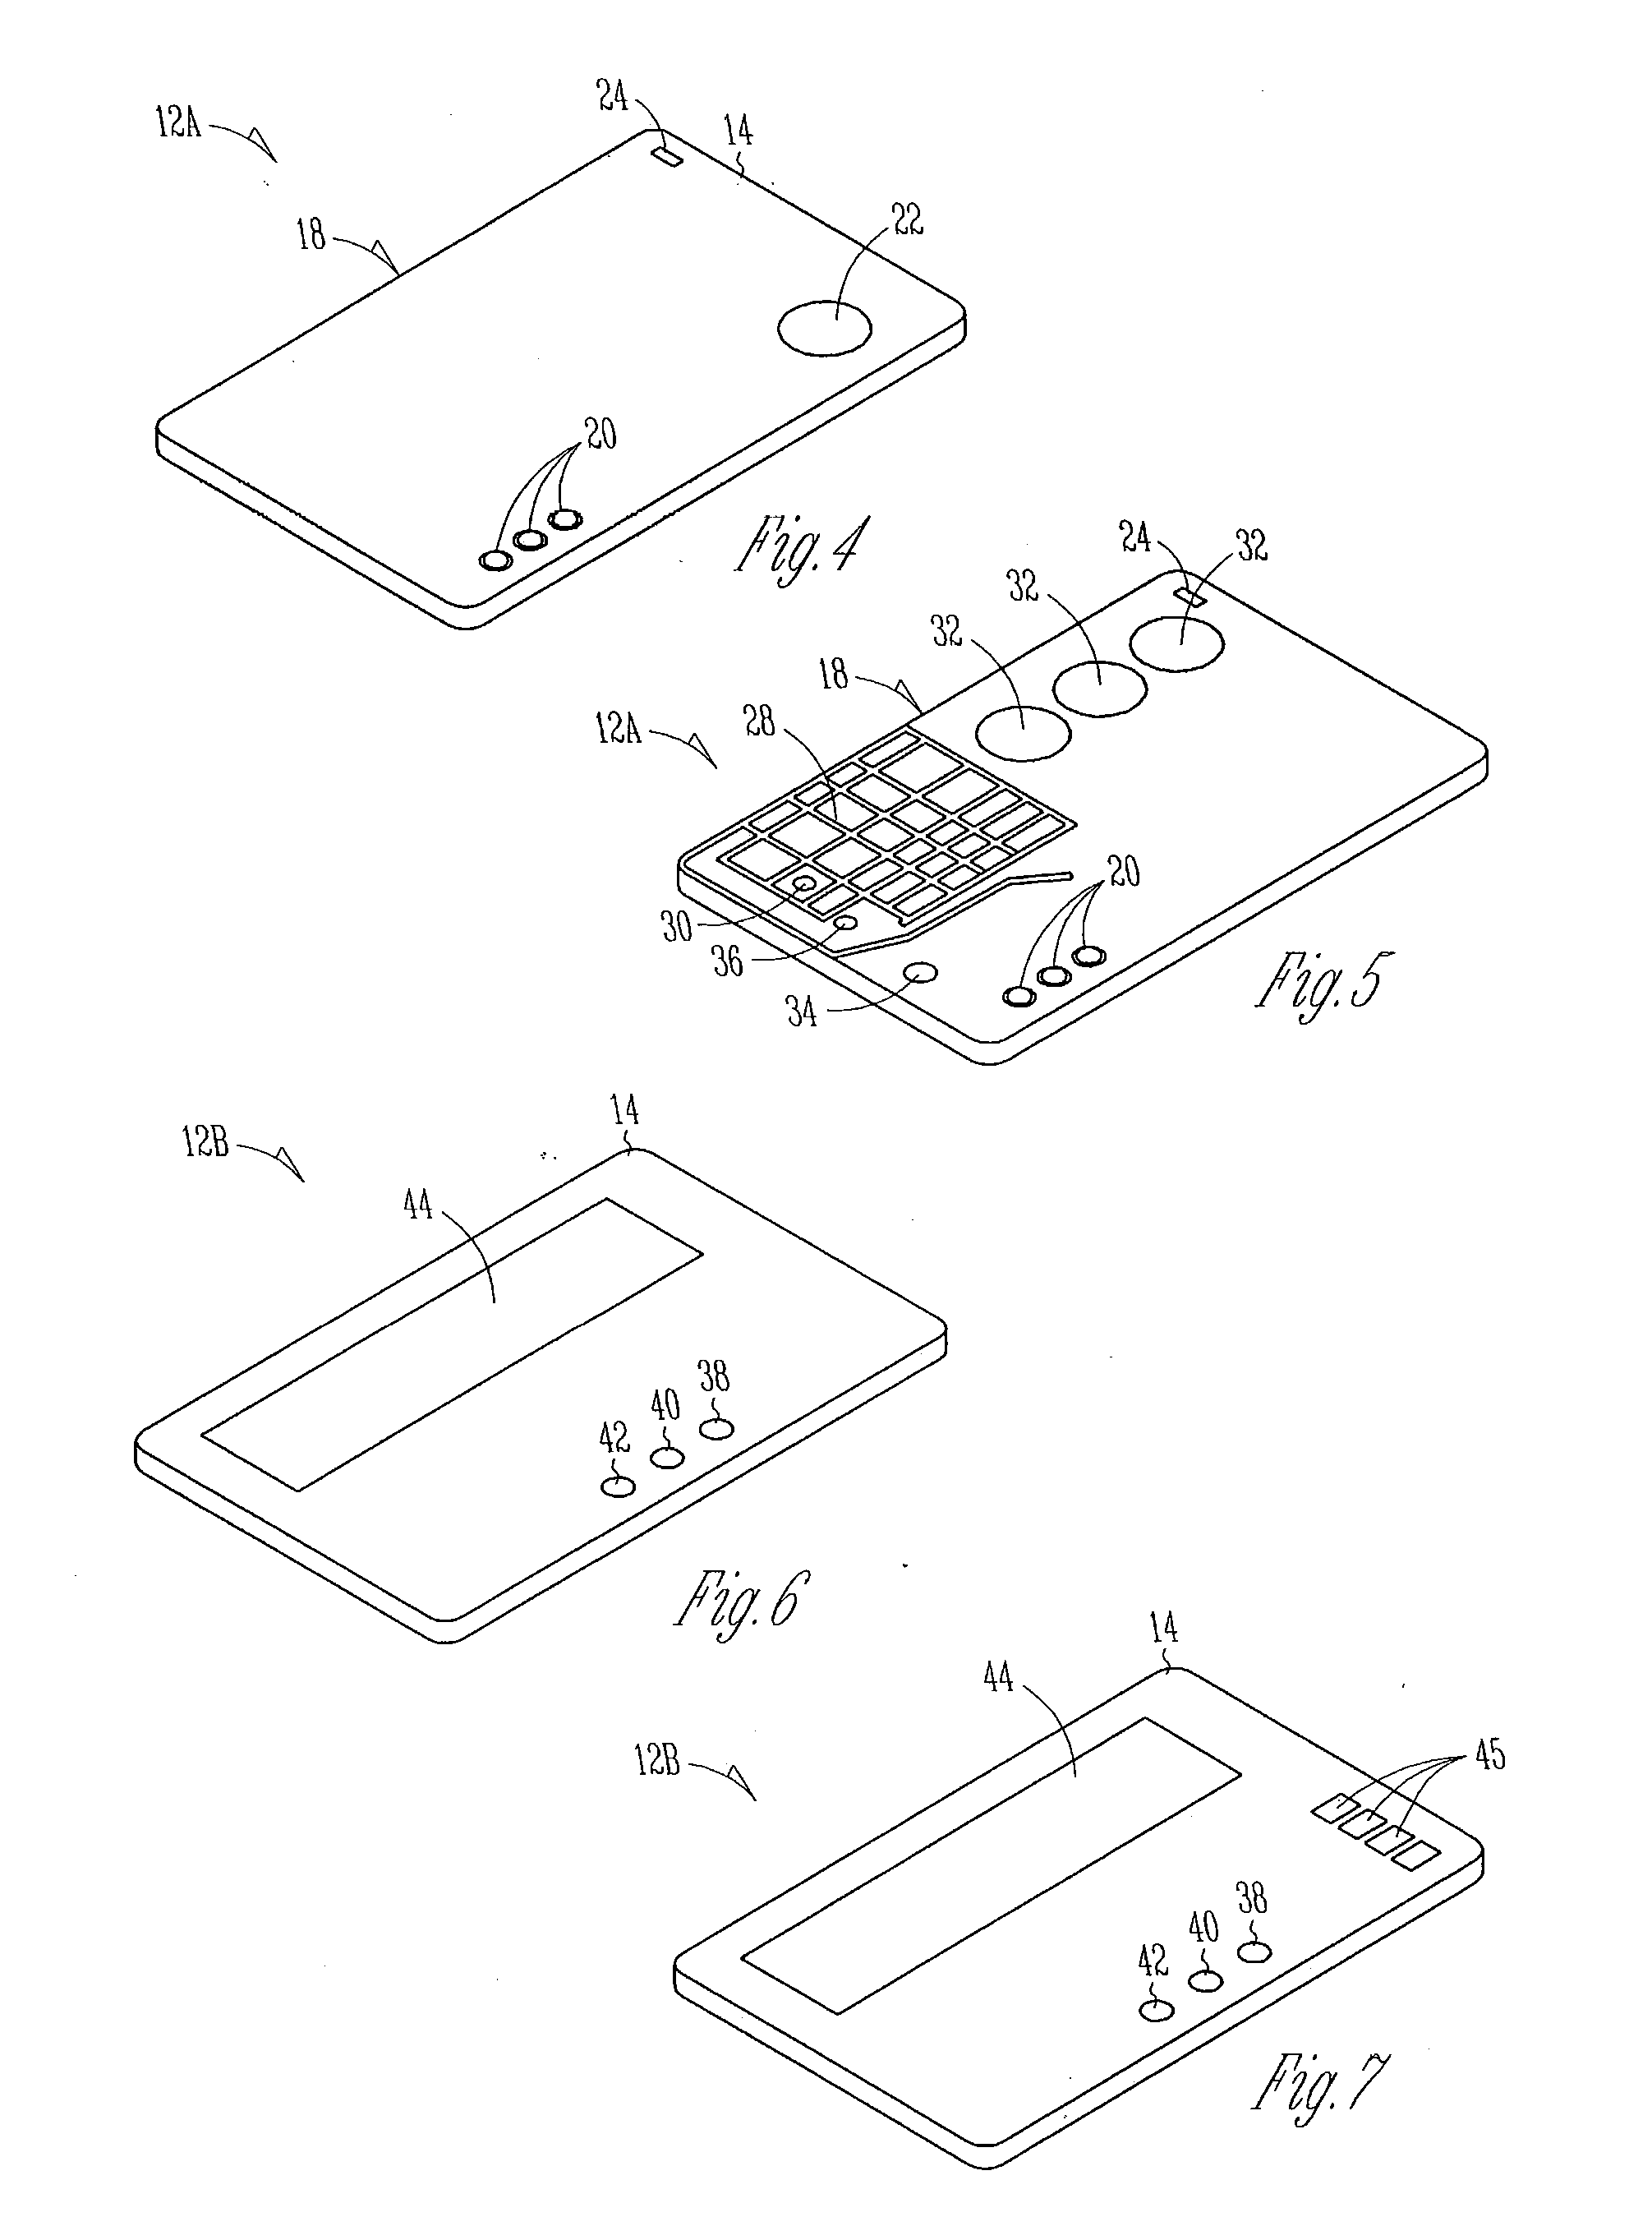 Interactive optical cards and other hand-held devices with increased connectivity